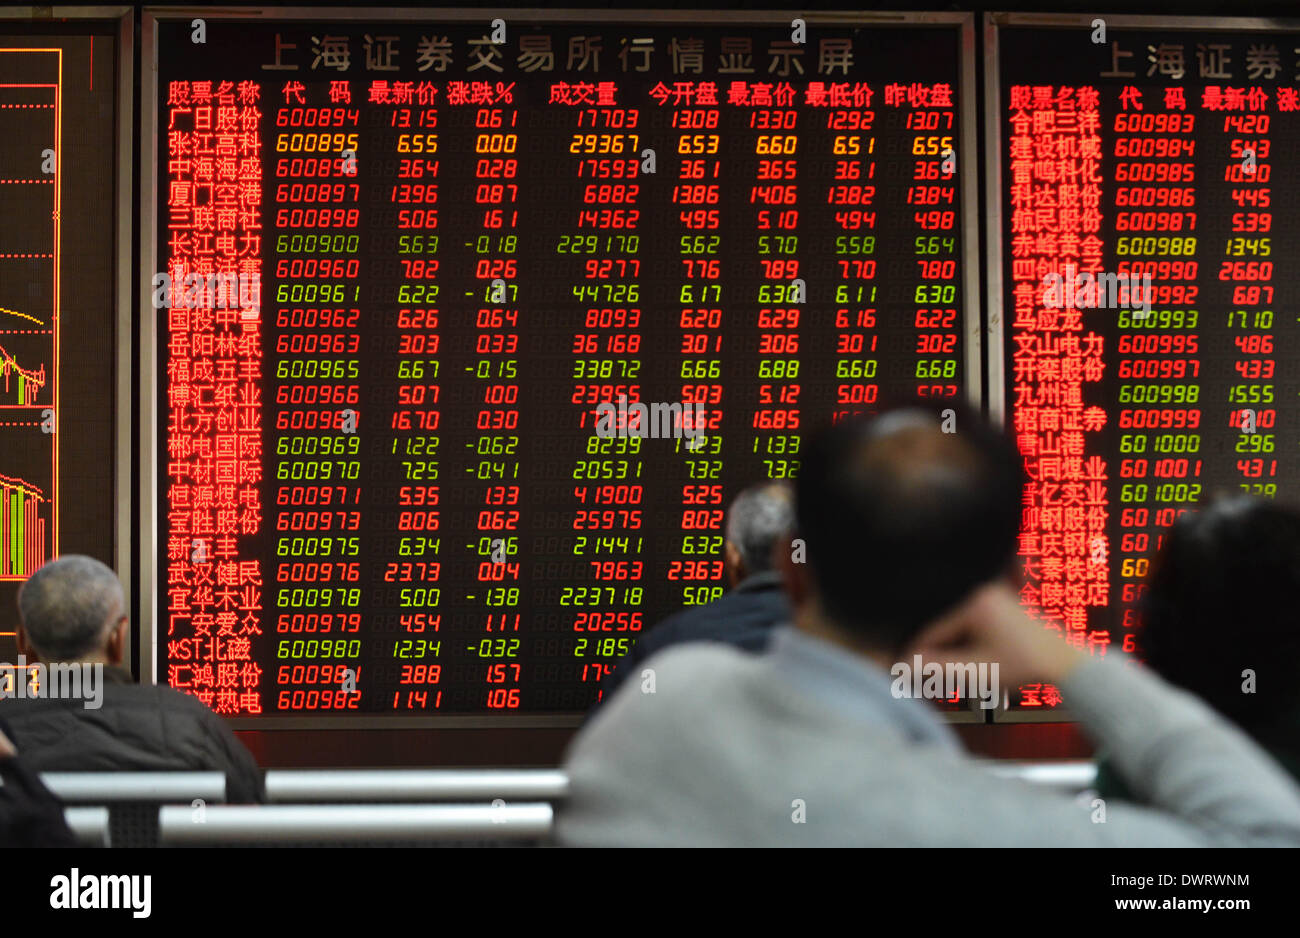 Beijing, China. 13th Mar, 2014. Investors look through stock information in a trading hall at a securities firm in Beijing, capital of China, March 13, 2014. Chinese shares closed higher on March 13 with the benchmark Shanghai Composite Index up 1.07 percent, or 21.42 points, to finish at 2,019.11. The Shenzhen Component Index slightly gained 1.42 percent, or 102.27 points, to close at 7,319.29. © Wang Quanchao/Xinhua/Alamy Live News Stock Photo